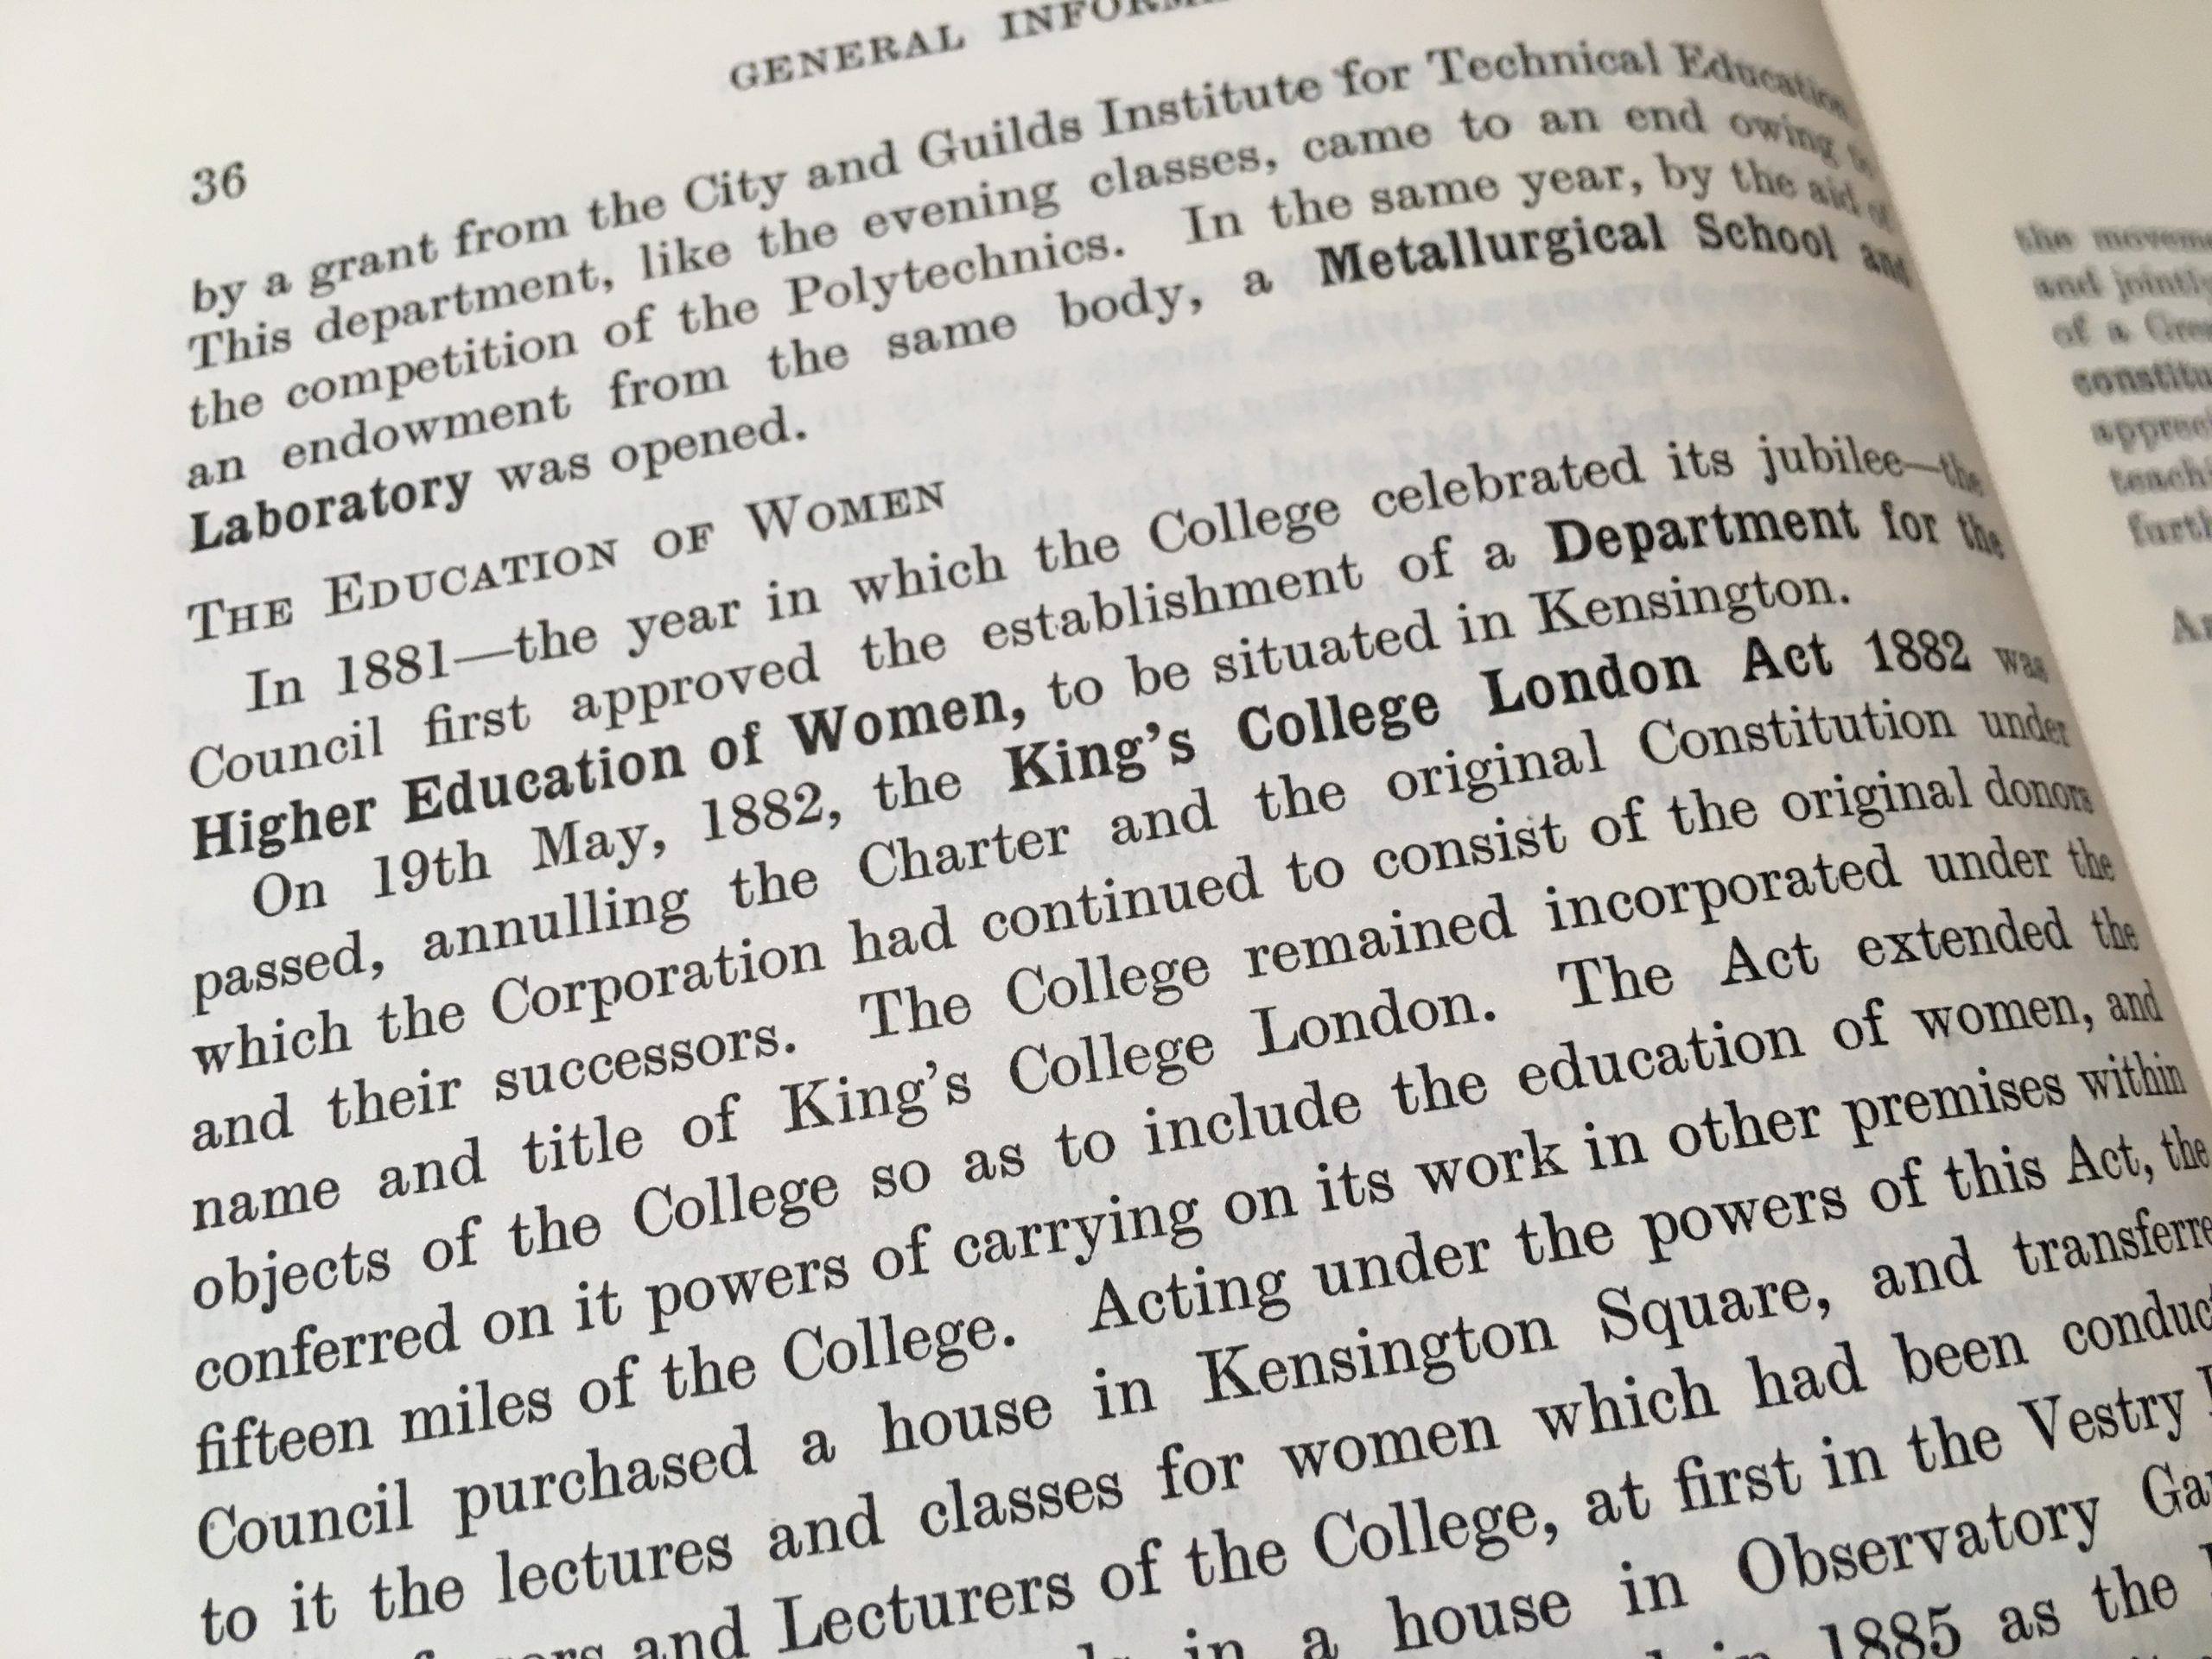 'The Education of Women', in The King's College London Calendar, 1956-57, held at the King's College London Archives.